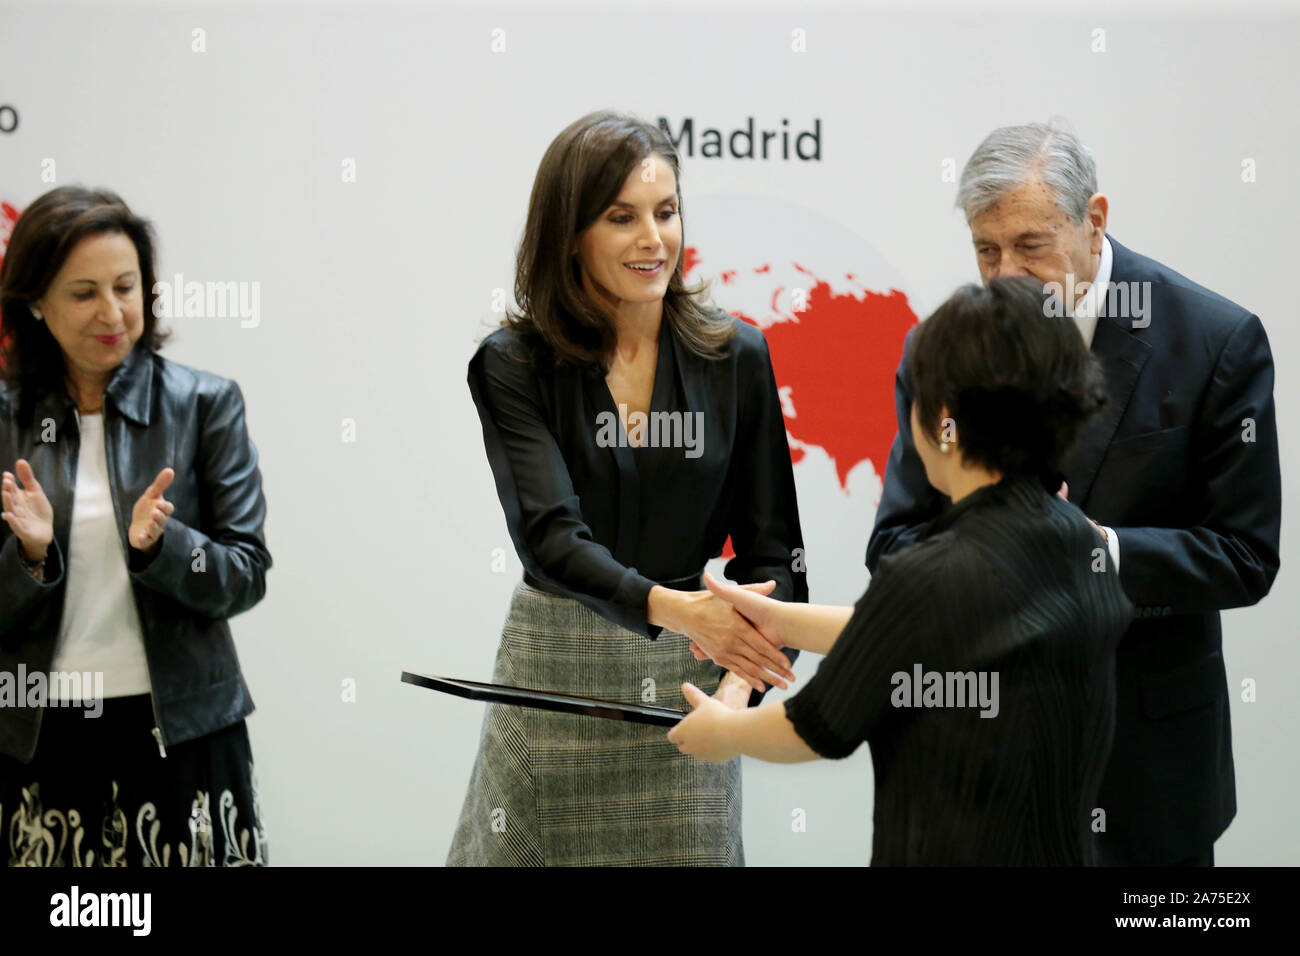 Madrid, Spain; 30/10/2019.- Queen Letizia presides over the delivery of the International Friendship Award (IFA), seven Chinese and African entrepreneurs recognize their contribution to investment and job creation in their countries and abroad. The Winners are Li Ka Shing, president of CK Hutchison Holdings; Hong Tianzhu, president and CEO of Texhong Textile Group Limited; Liling Qi, president of Puente China España and La Roca Golf Resort; Lidan Qi, general director of Puente China España; and Chen Xi, president of Sanquan Food Co. Ltd. In addition, the trajectory of the president of the Firs Stock Photo